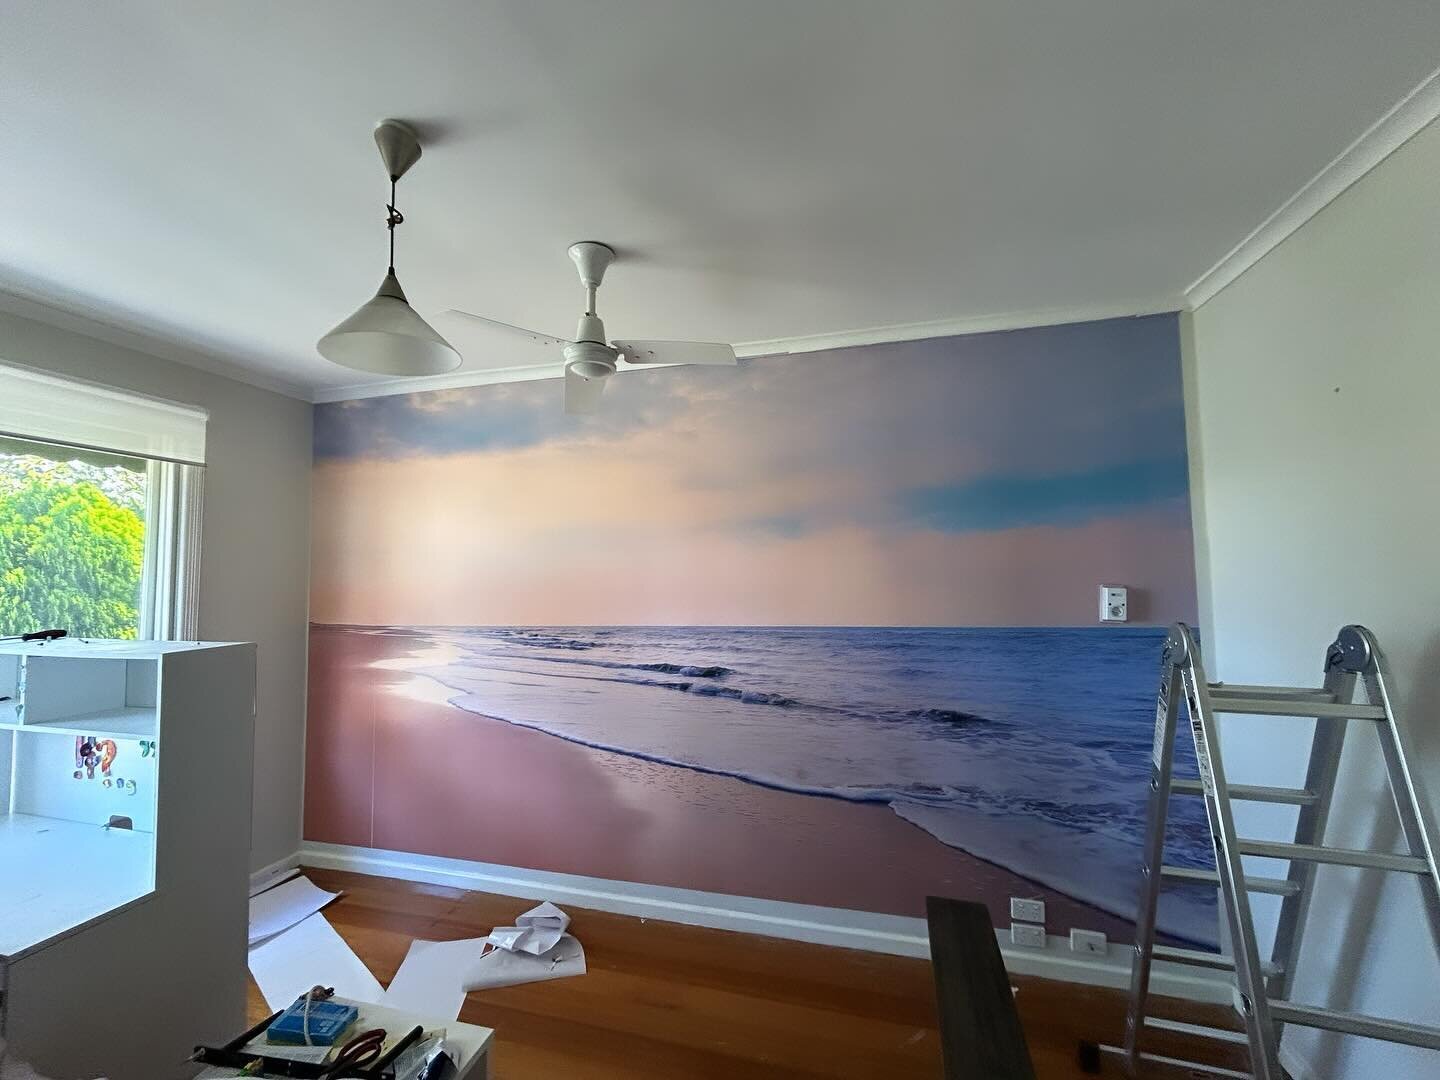 Perfect wallpaper for a day like today. &ldquo;Dawn at the beach&rdquo;  It was hard to put it up, but looks so good! Happy to make my daughter happy;)